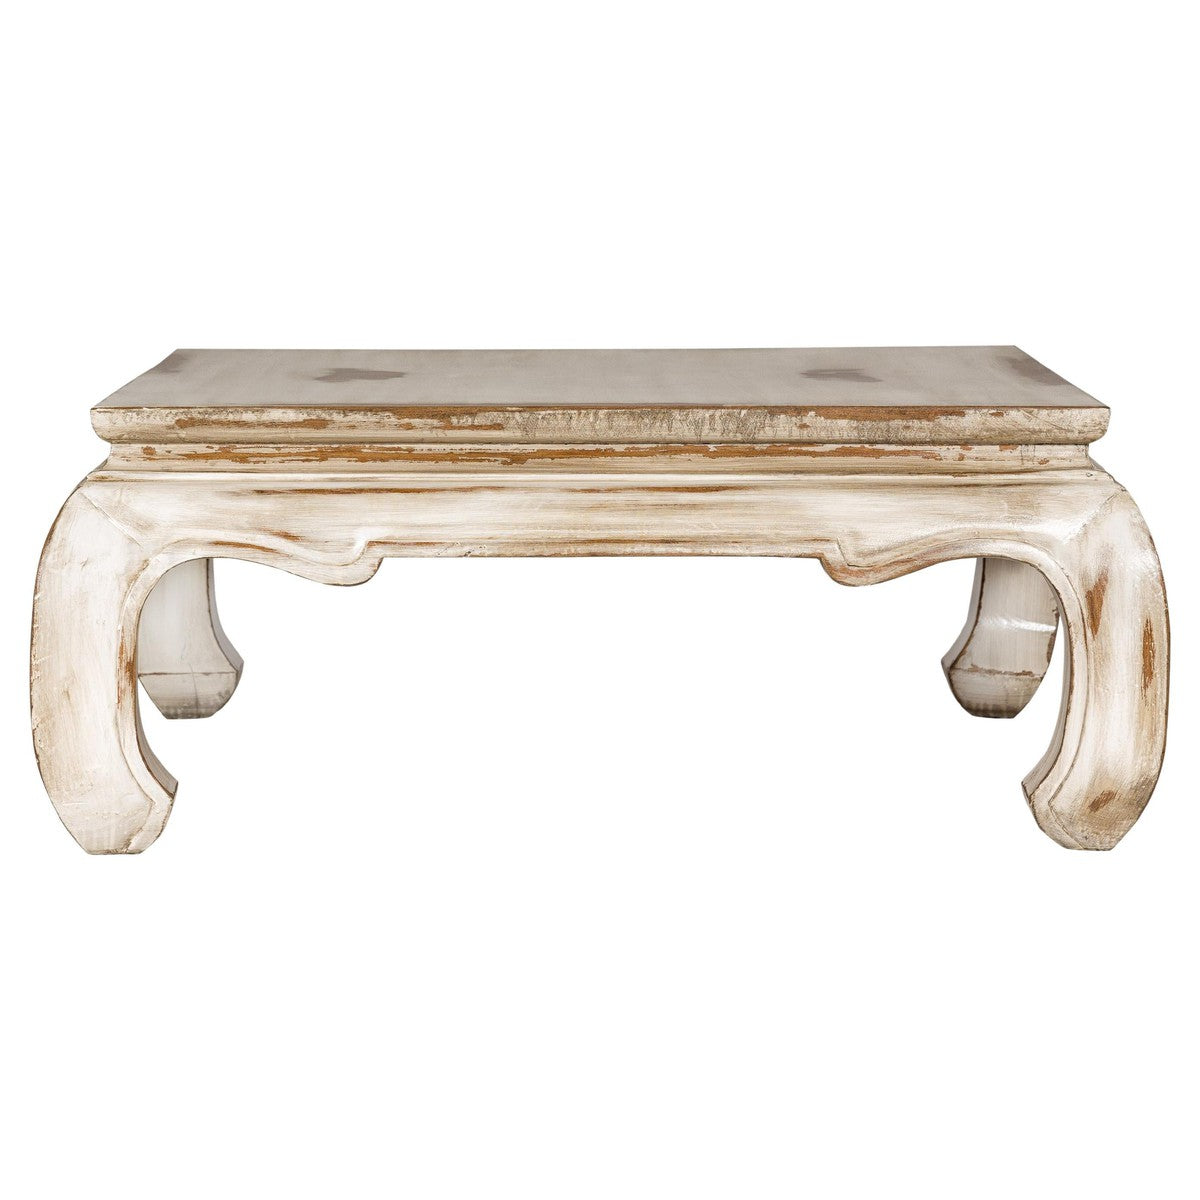 Distressed White Coffee Table with Chow Legs and Square Top, Vintage-YN7957-1. Asian & Chinese Furniture, Art, Antiques, Vintage Home Décor for sale at FEA Home